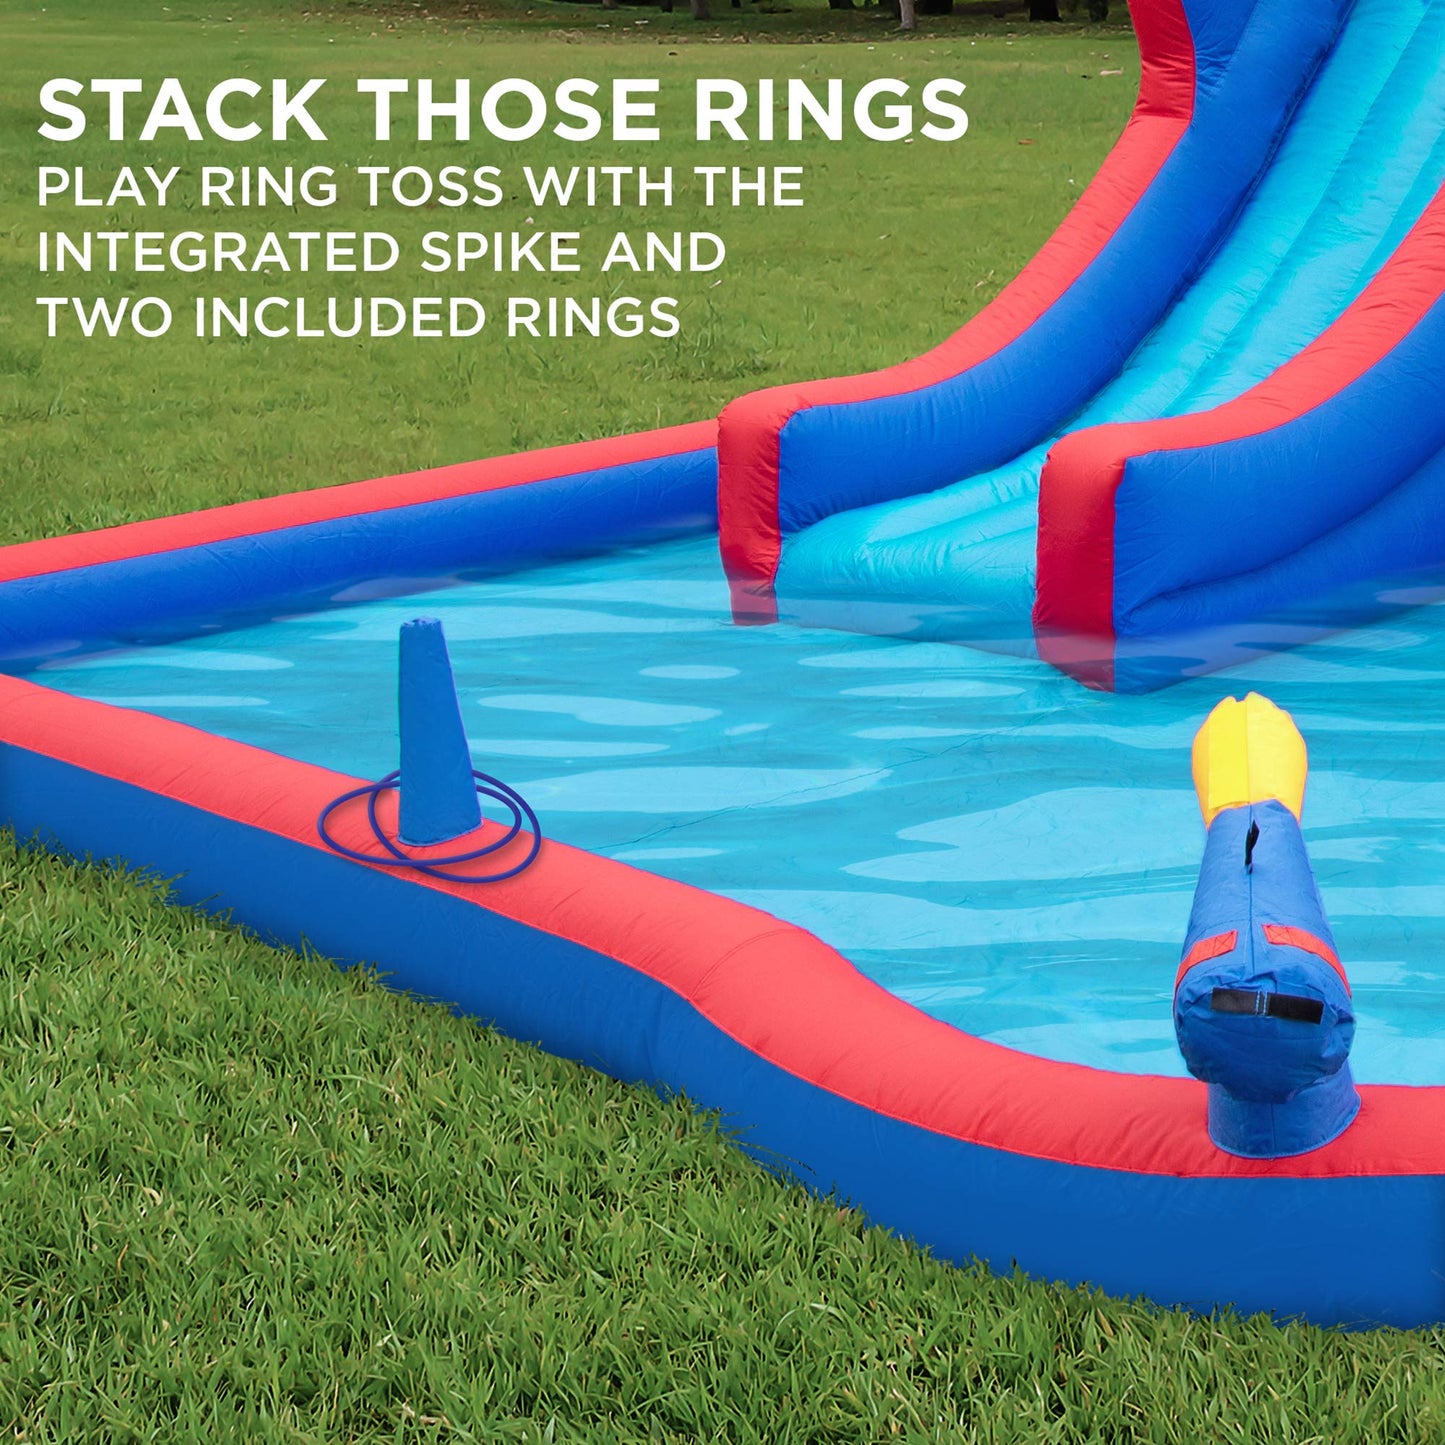 Sunny & Fun 2-in-1 Bounce & Blast Inflatable Water Slide Park – Heavy-Duty for Outdoor Fun - Climbing Wall, Slide, Bouncer & Splash Pool – Easy to Set Up, Included Air Pump & Carrying Case